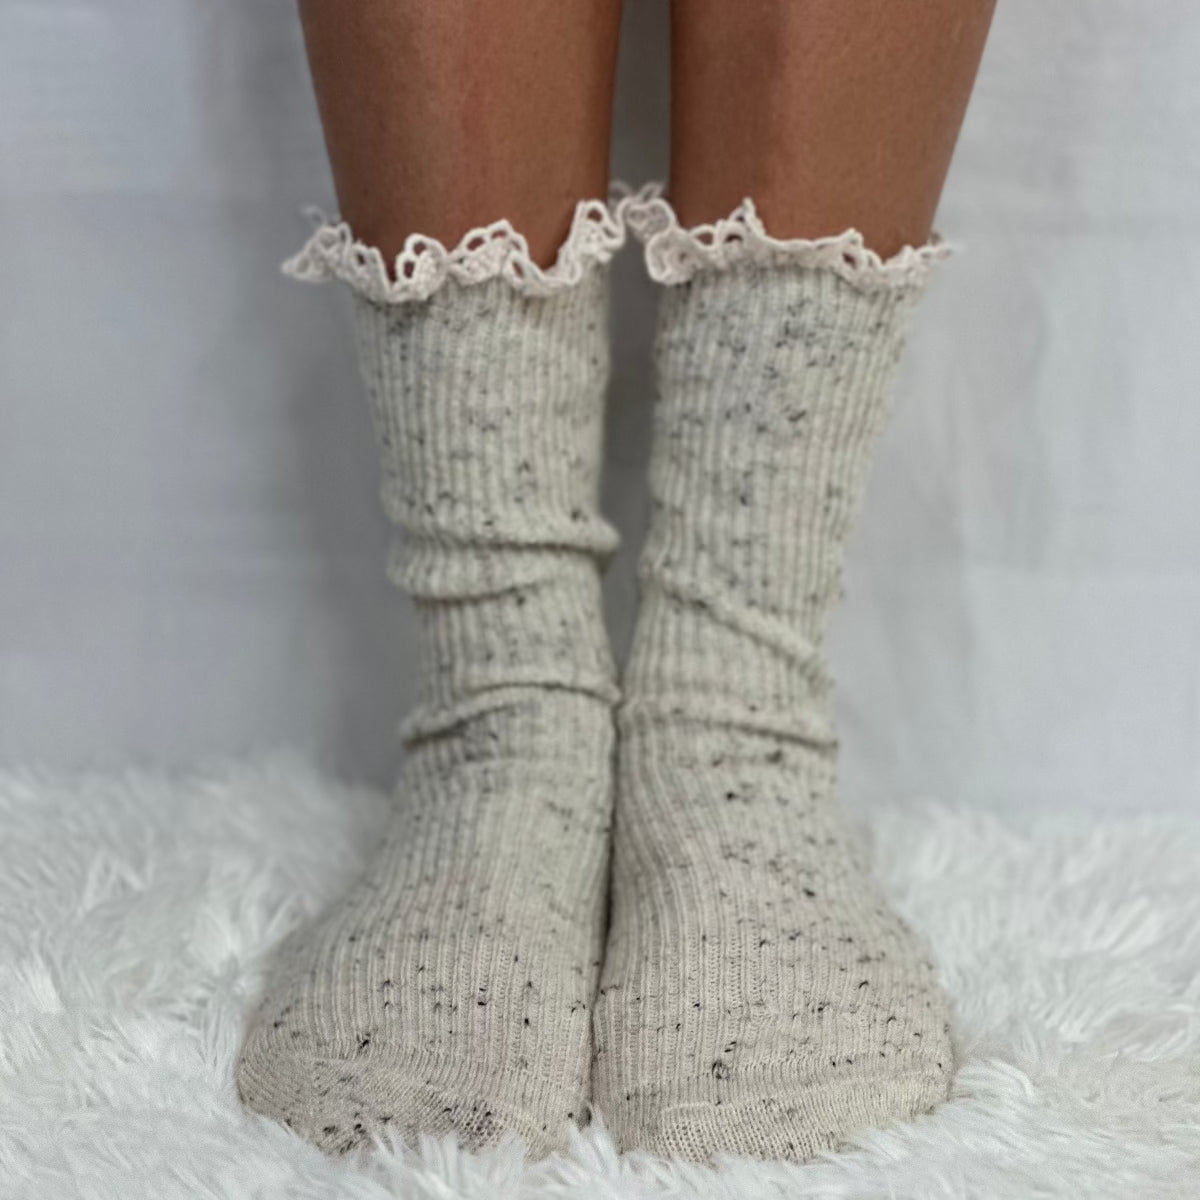 Grey tweed knit designer lace socks women, cute socks for booties, lace topped ankle boot socks designer 